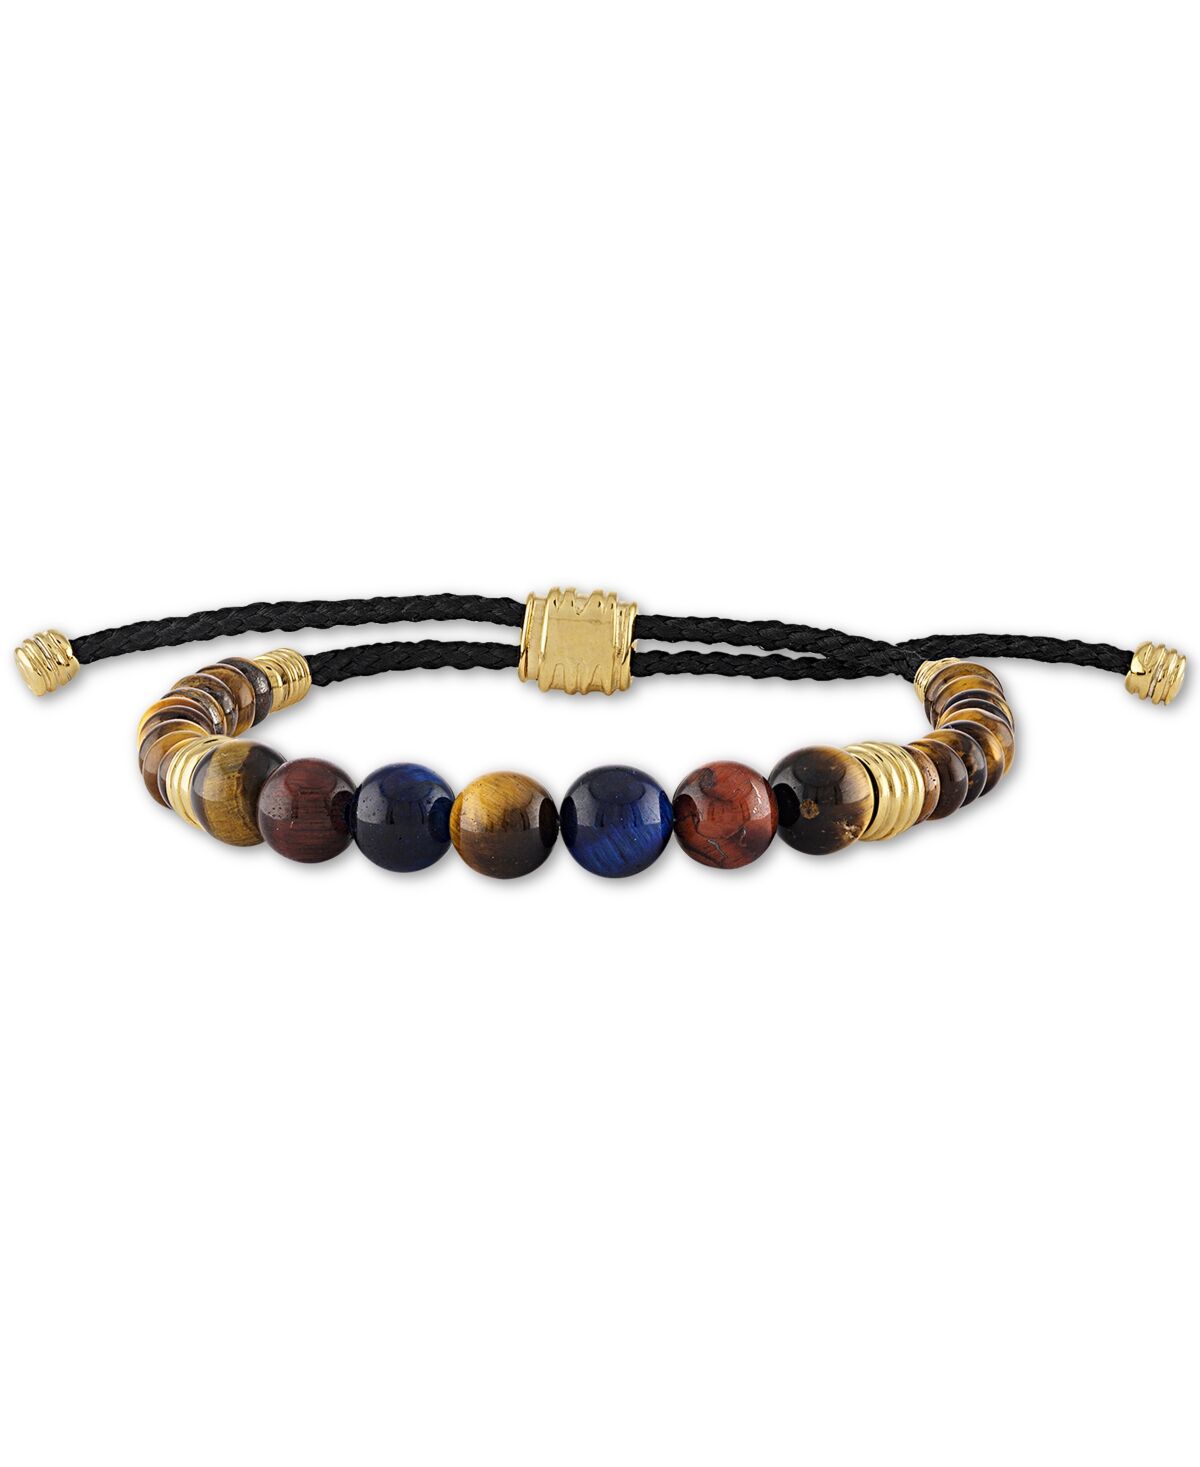 Esquire Men's Jewelry Multicolor Tiger's Eye Bead Bolo Bracelet in 14k Gold-Plated Sterling Silver, Created for Macy's - Silver